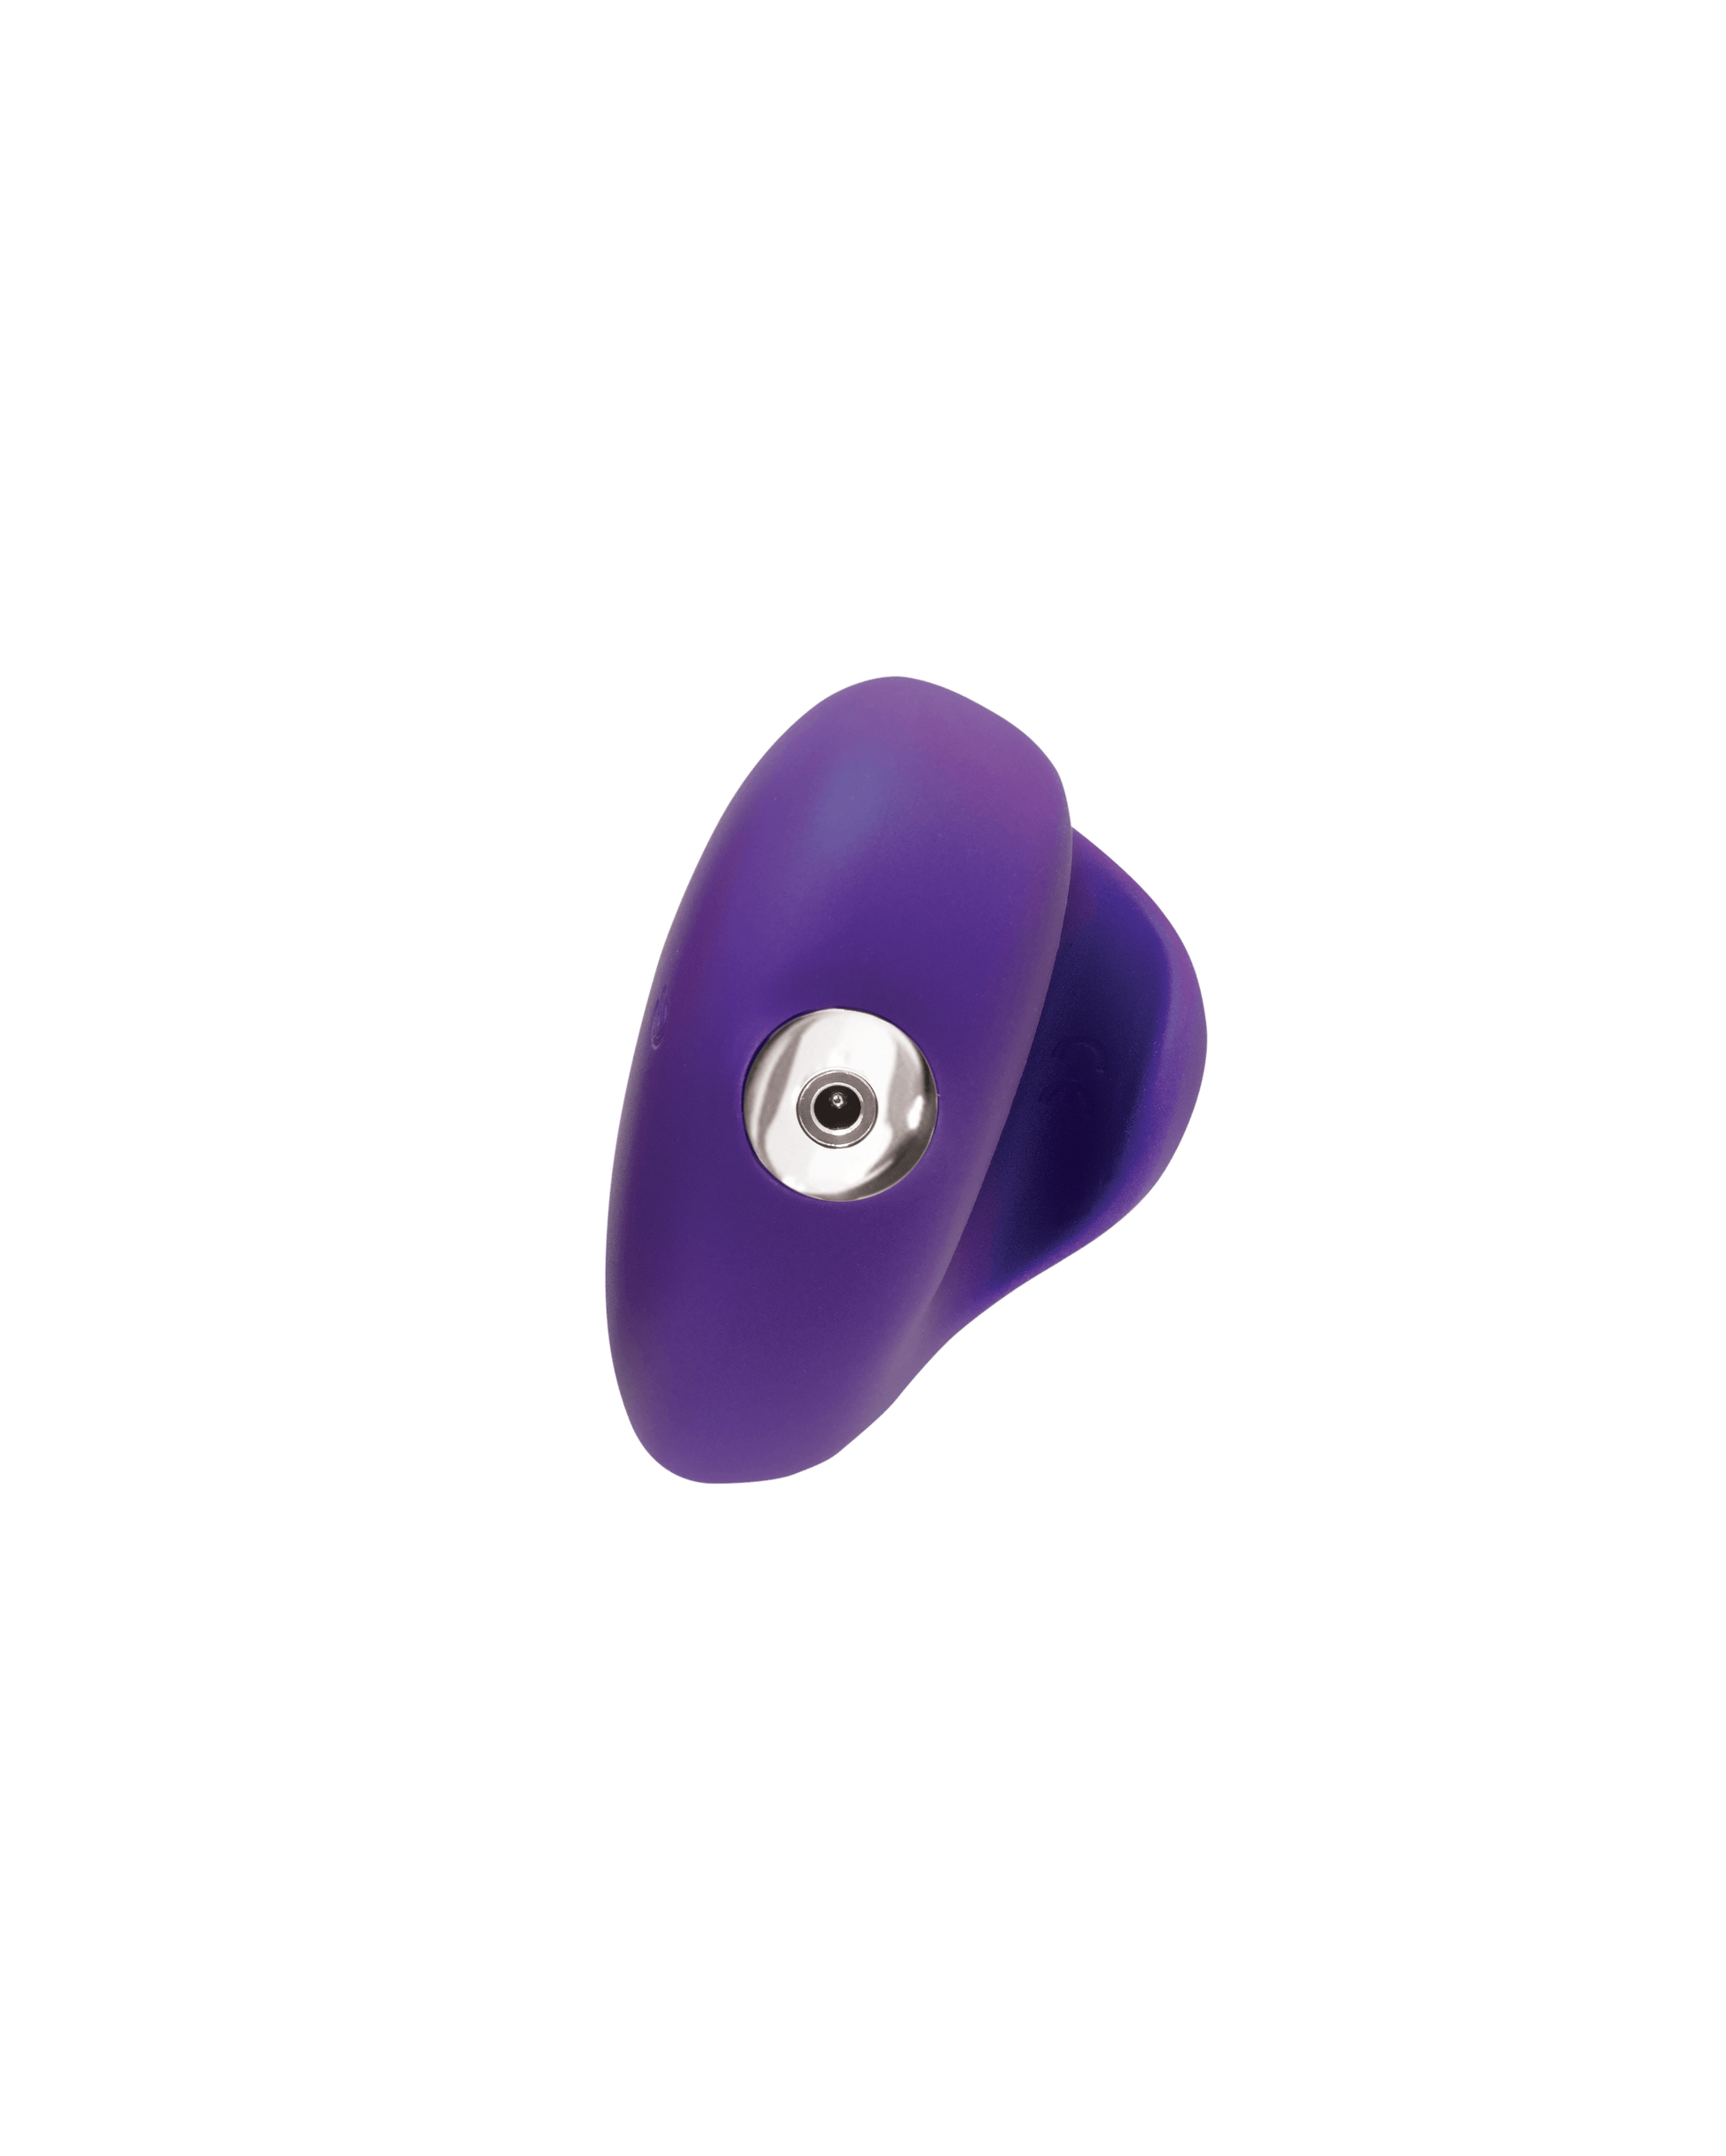 Amore Rechargeable Pleasure Vibe - Purple - My Sex Toy Hub